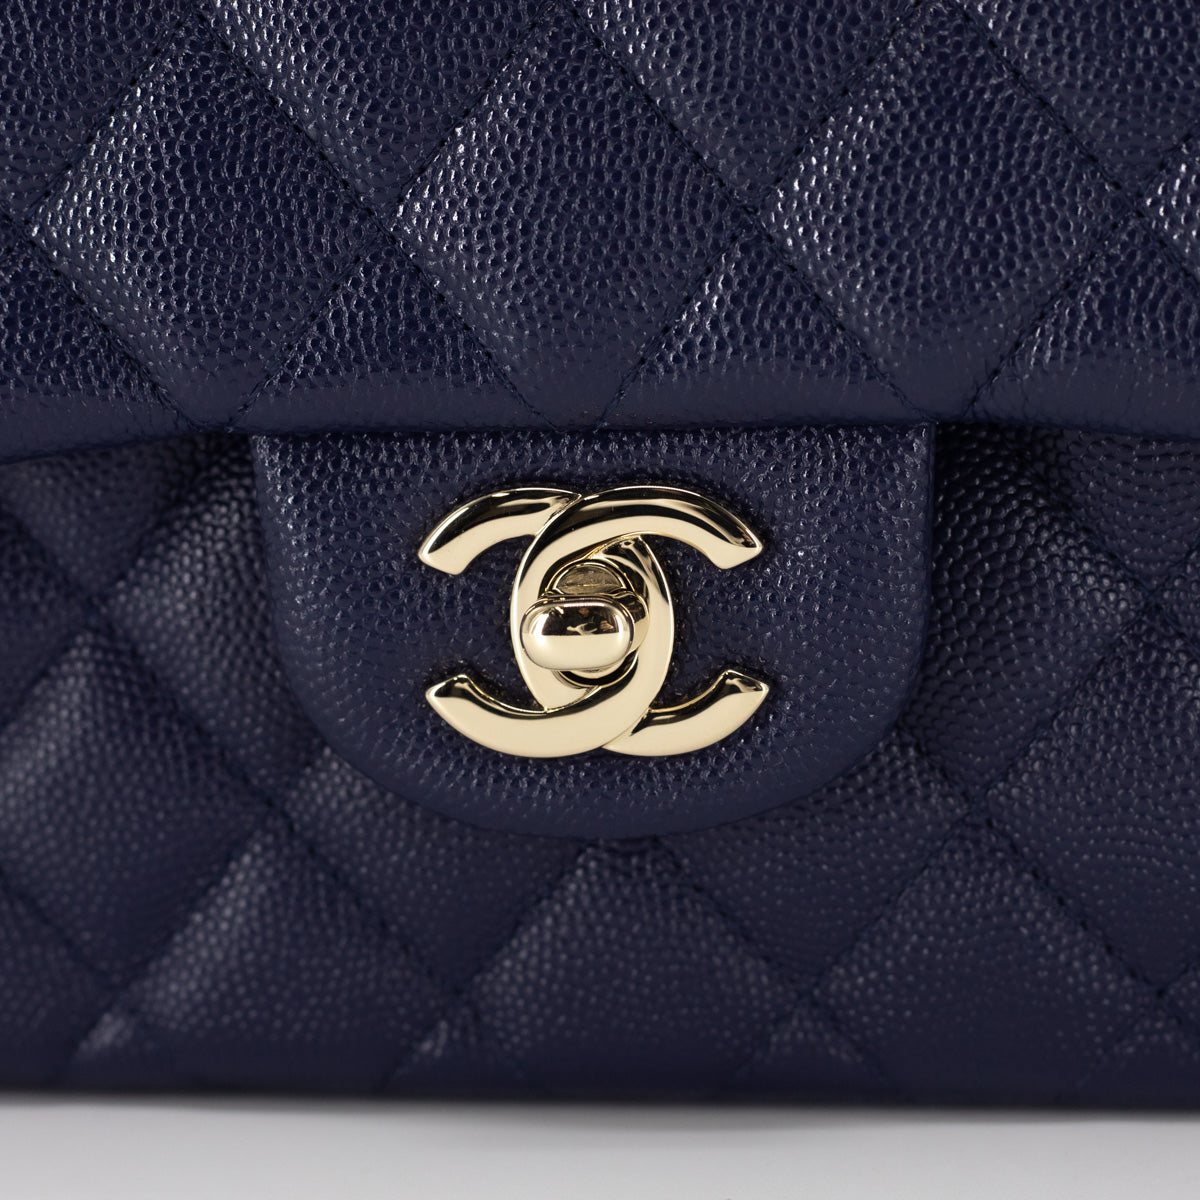 THE SELLIER BIBLE TO AUTHENTICATING A CHANEL CLASSIC FLAP DONT BE FO   Sellier